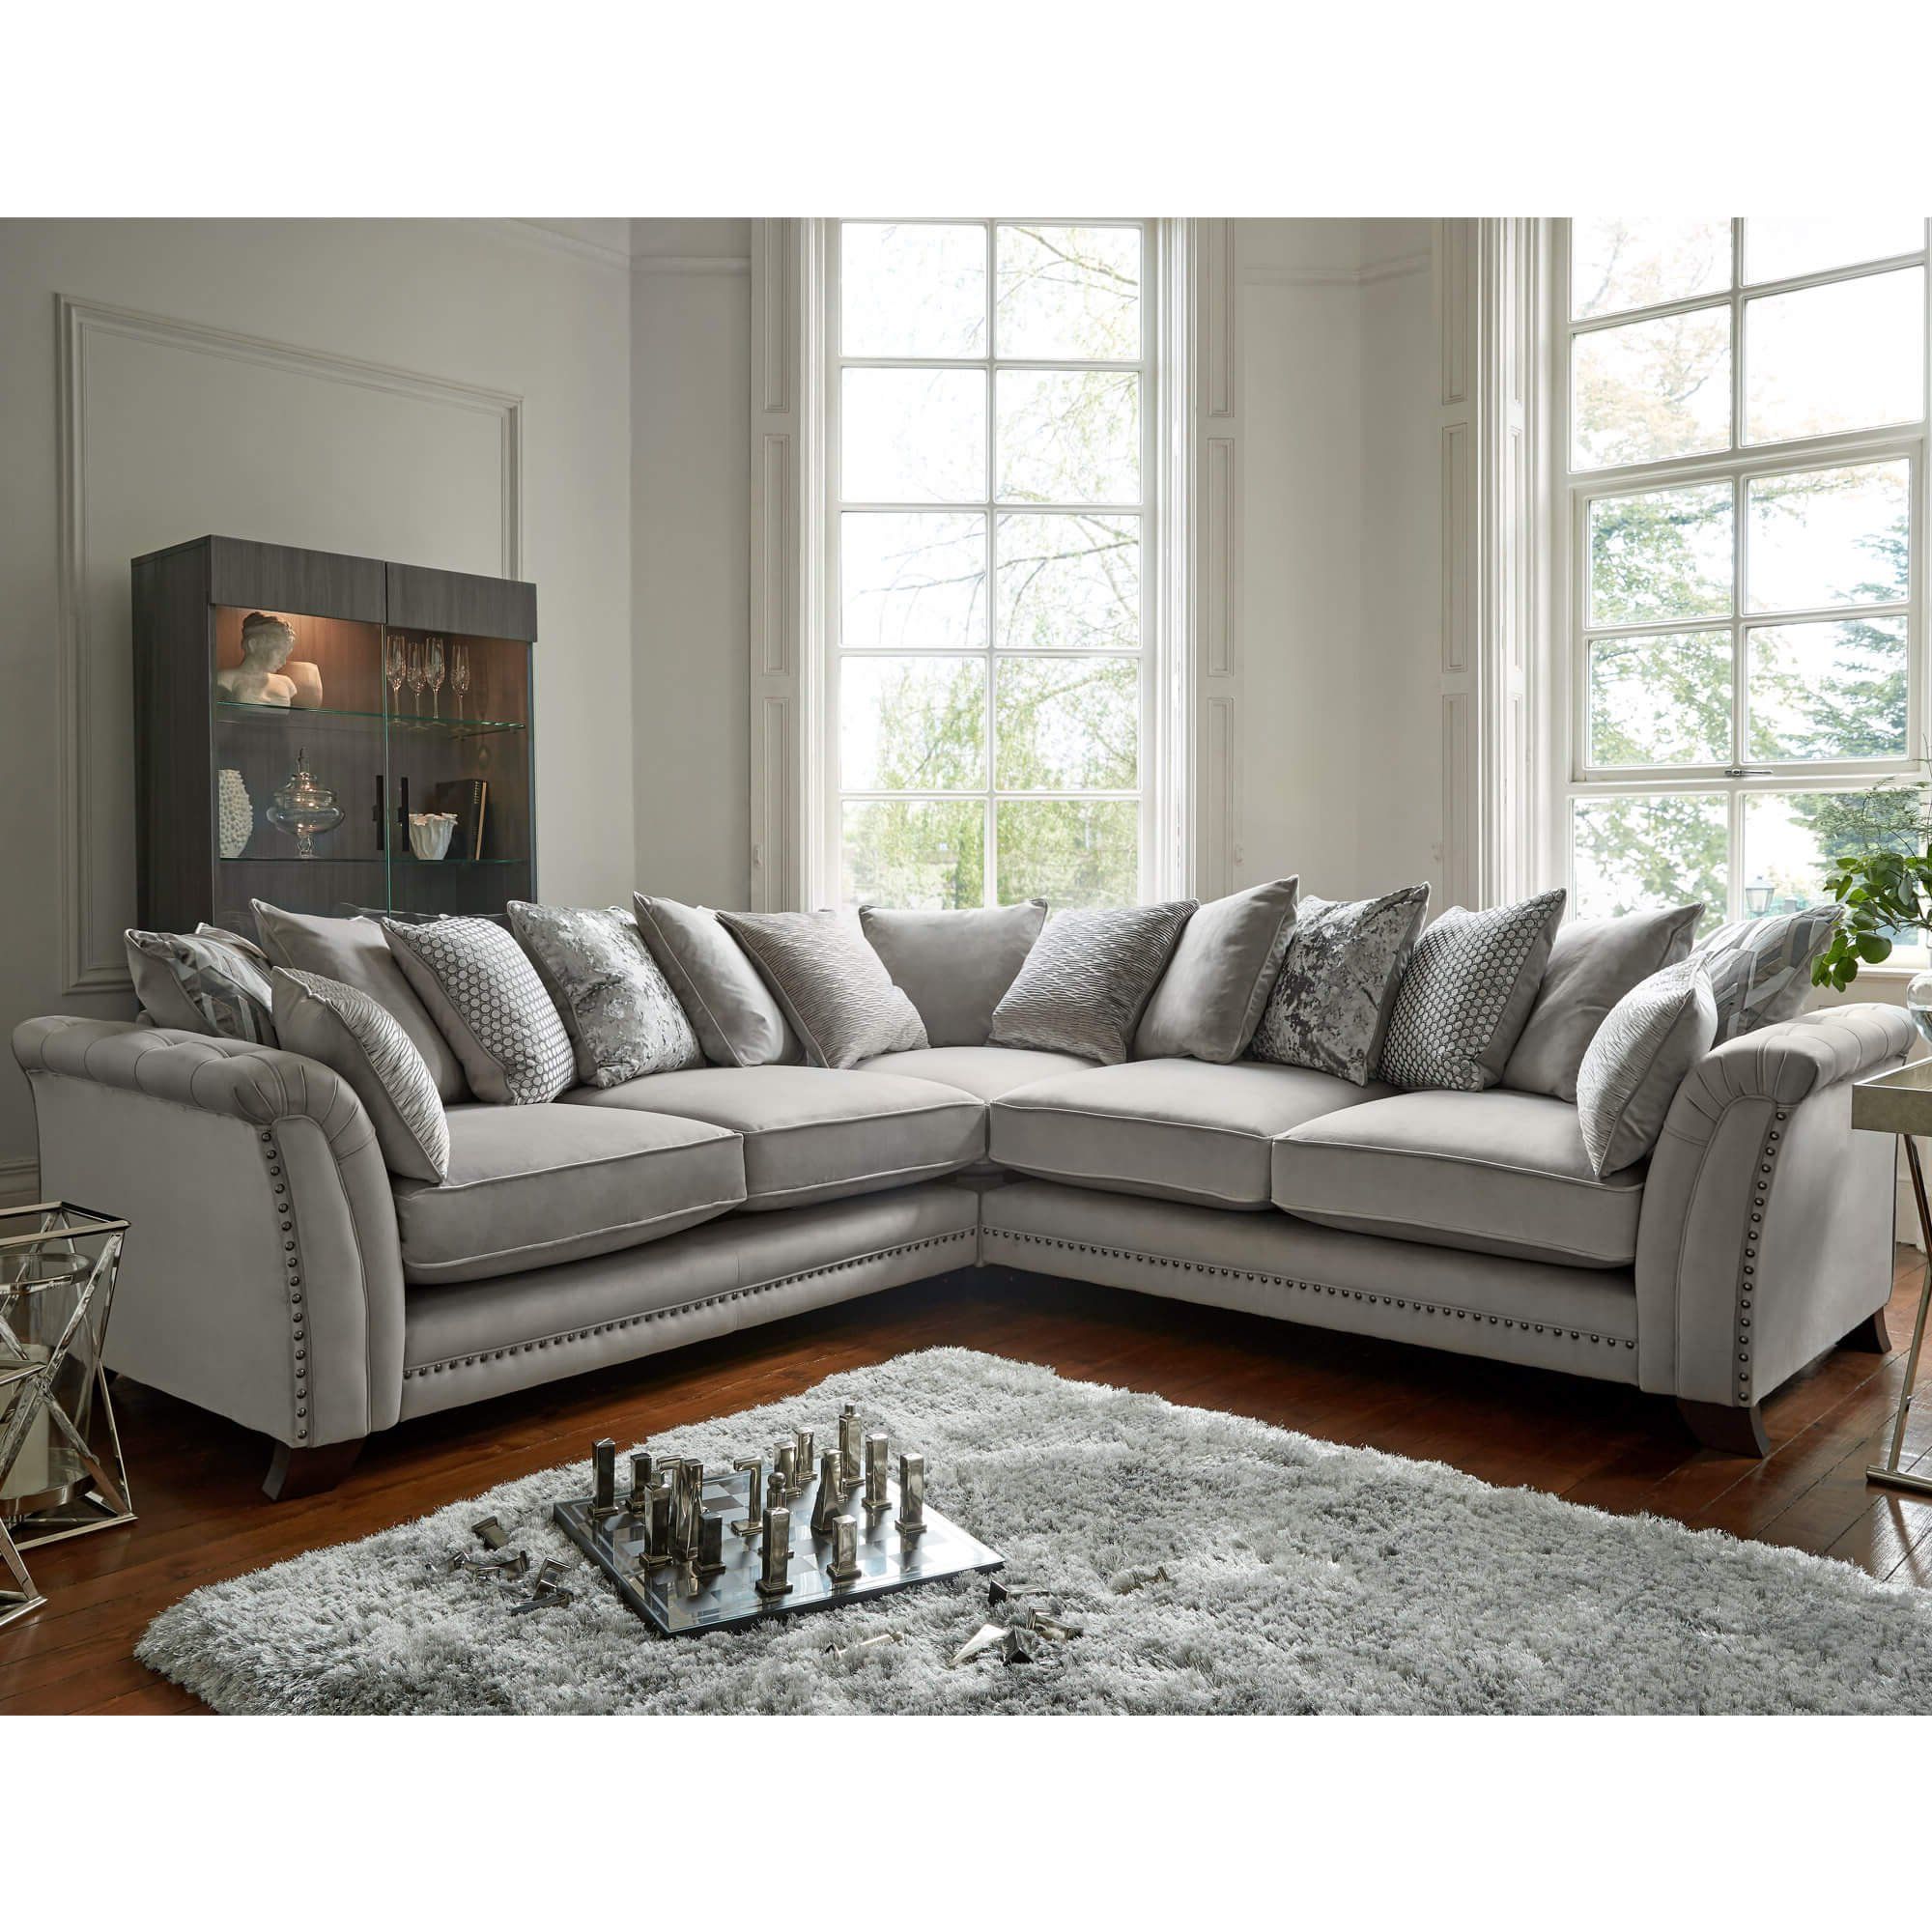 Fairfield Silver Velvet Pillow Back Sofa Collection With Pillowback Sofa Sectionals (View 9 of 20)